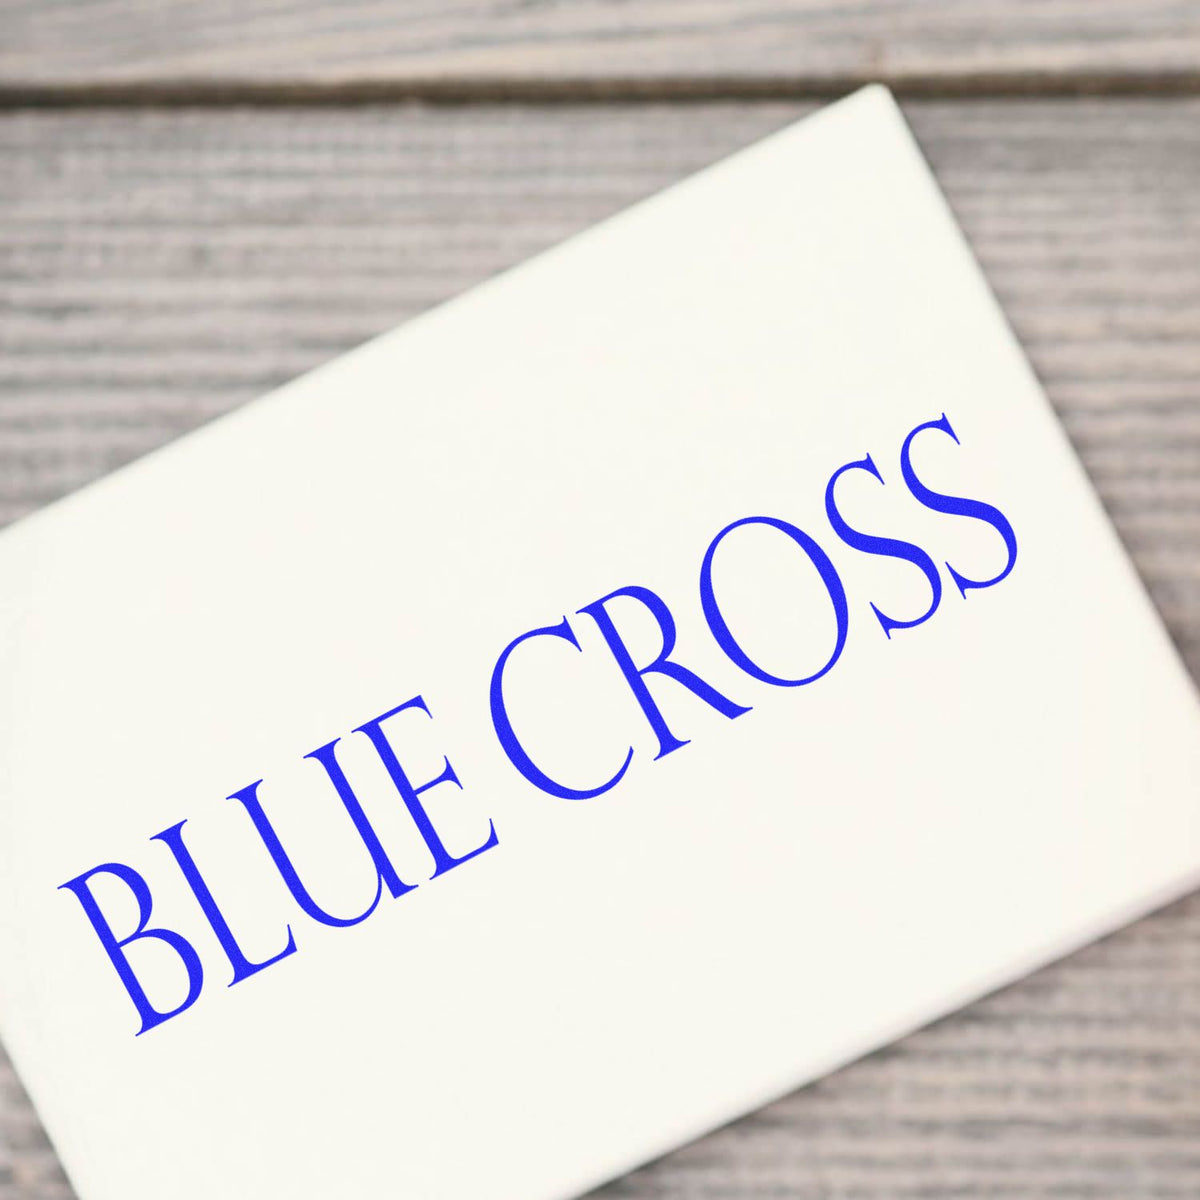 Blue Cross Rubber Stamp In Use Photo